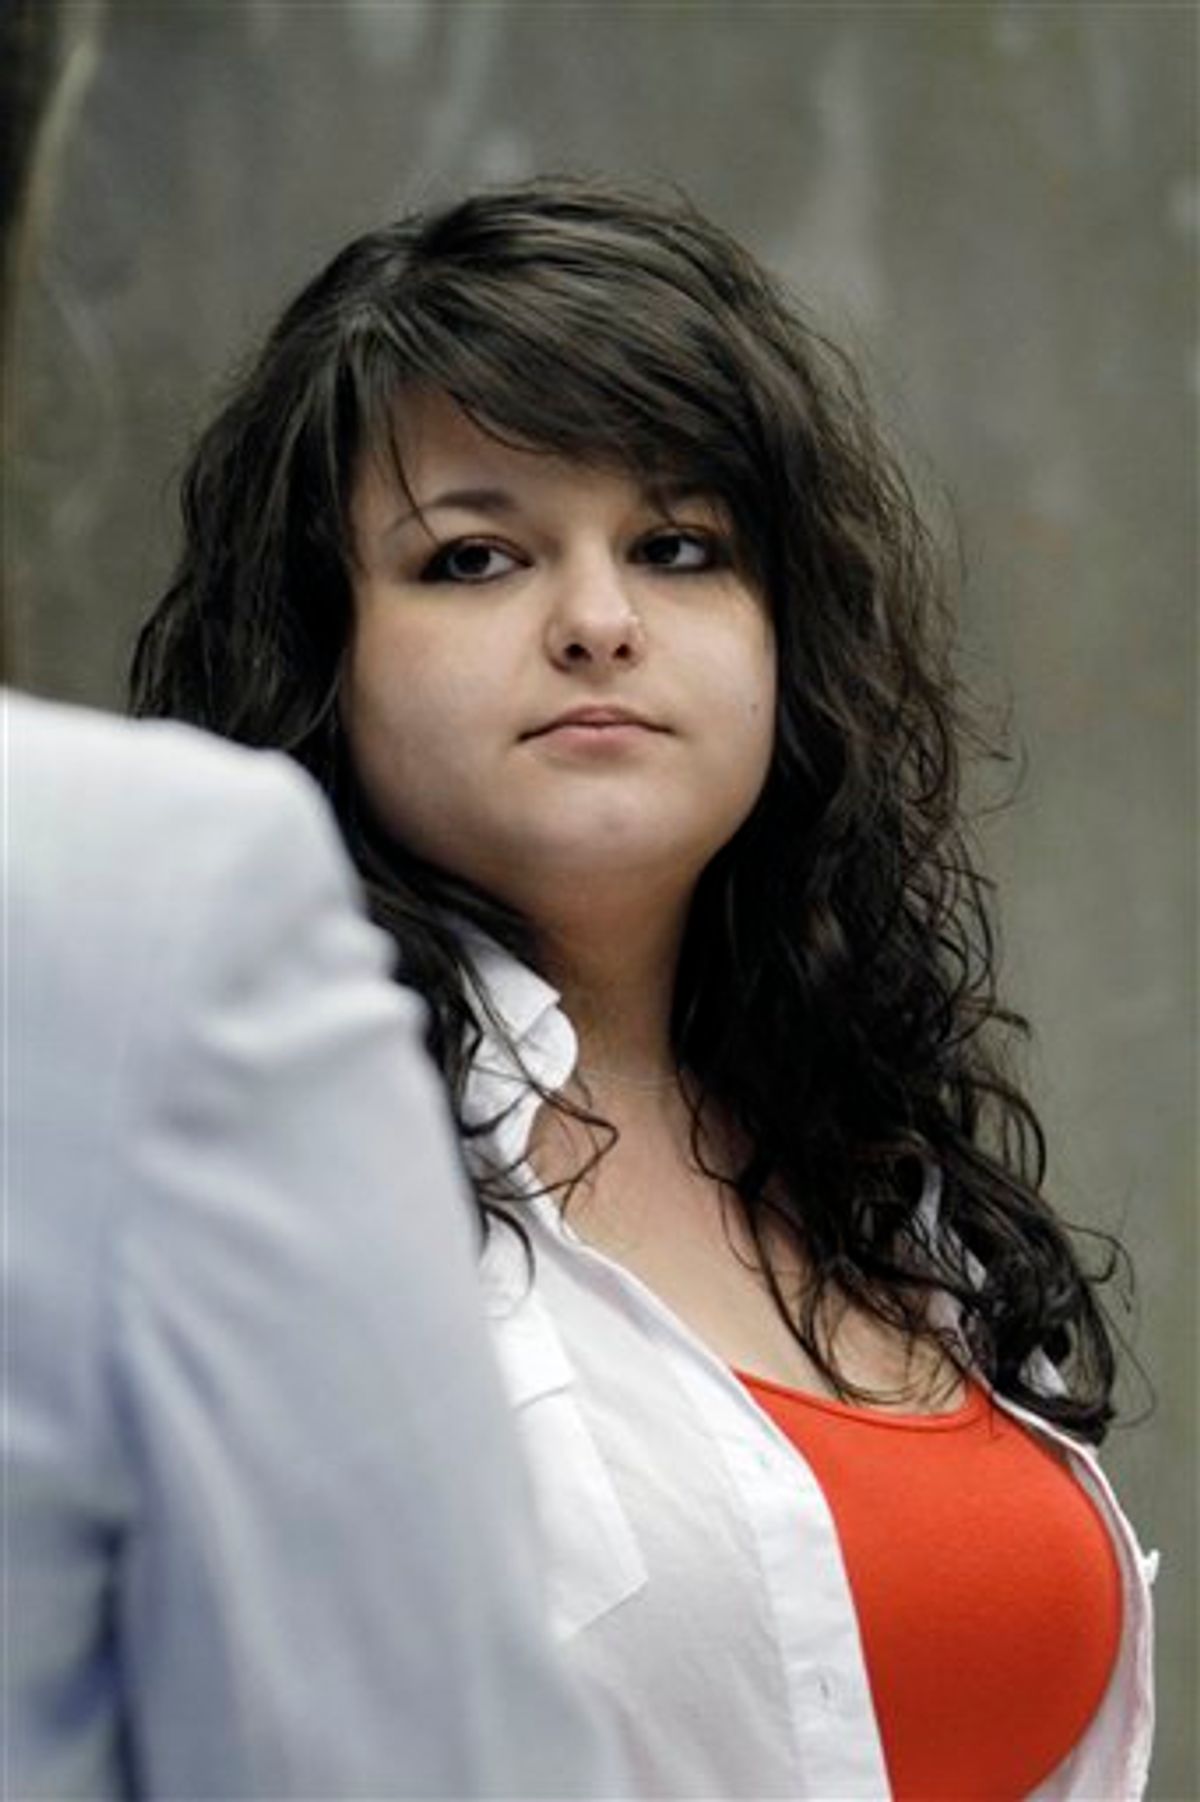 Constance McMillen, an 18-year-old senior at Itawamba County Agricultural High School, speaks to one of her legal team in the federal courthouse in Aberdeen, Miss., Monday, March 22, 2010, for a hearing regarding the ACLU's preliminary injunction to force the prom at her high school. McMillen was told by school authorities that she could not wear a tux or bring a same sex date to the prom on April 2. (AP Photo/Rogelio V. Solis) (AP)